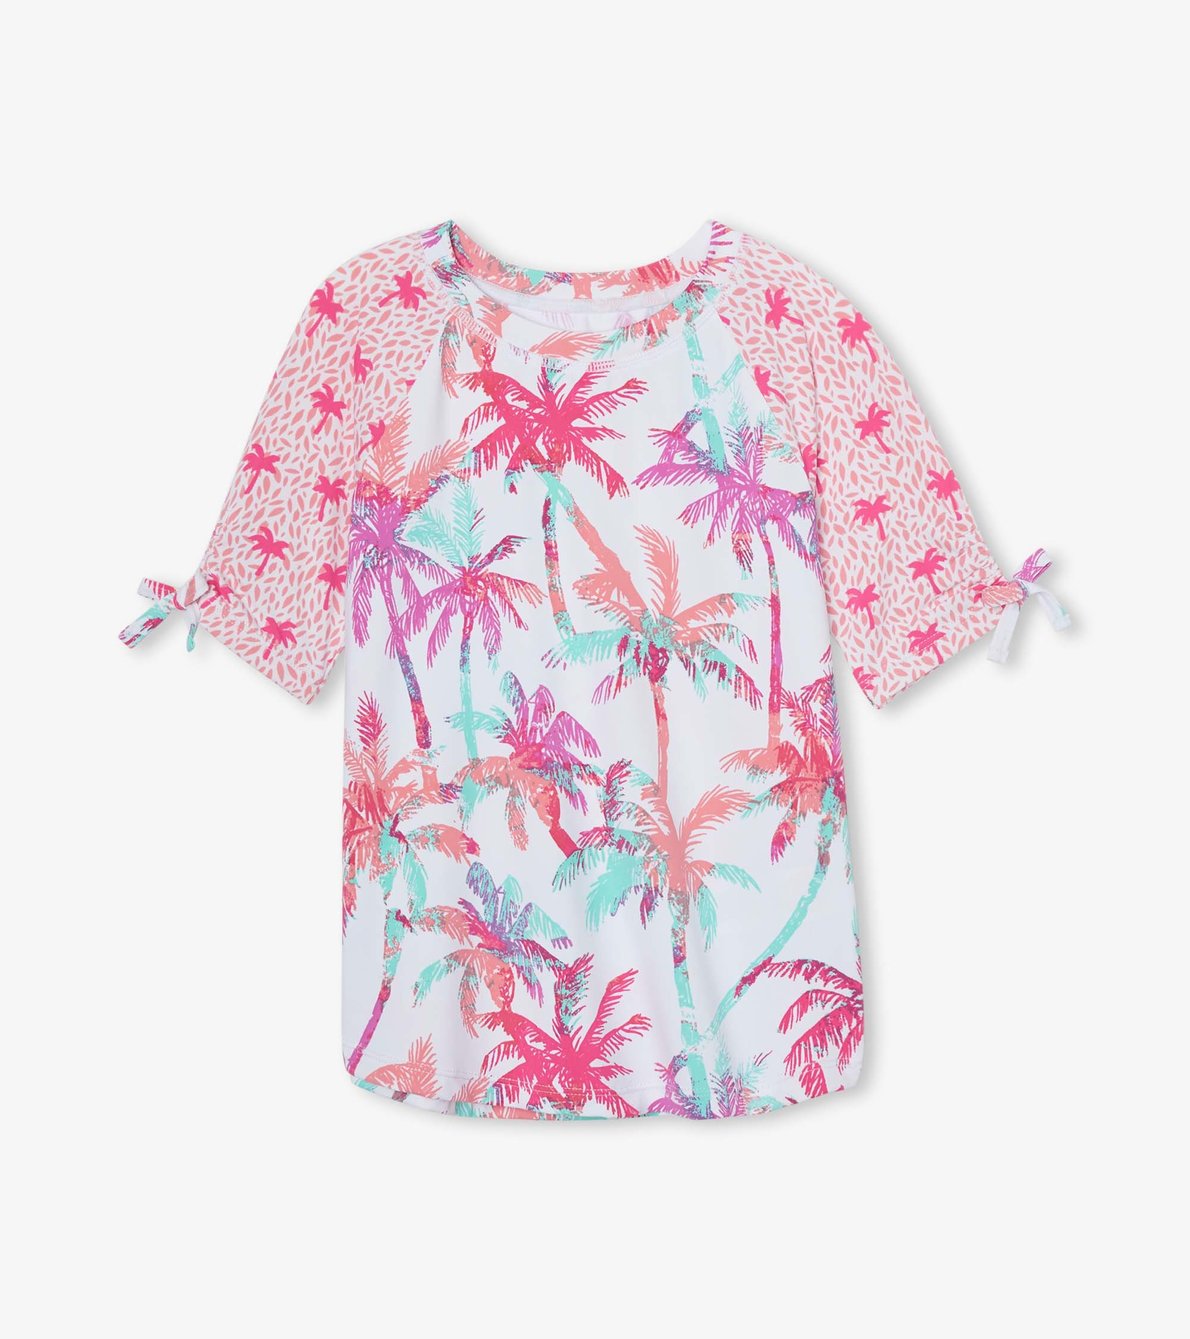 View larger image of Ombre Palms Short Sleeve Rashguard